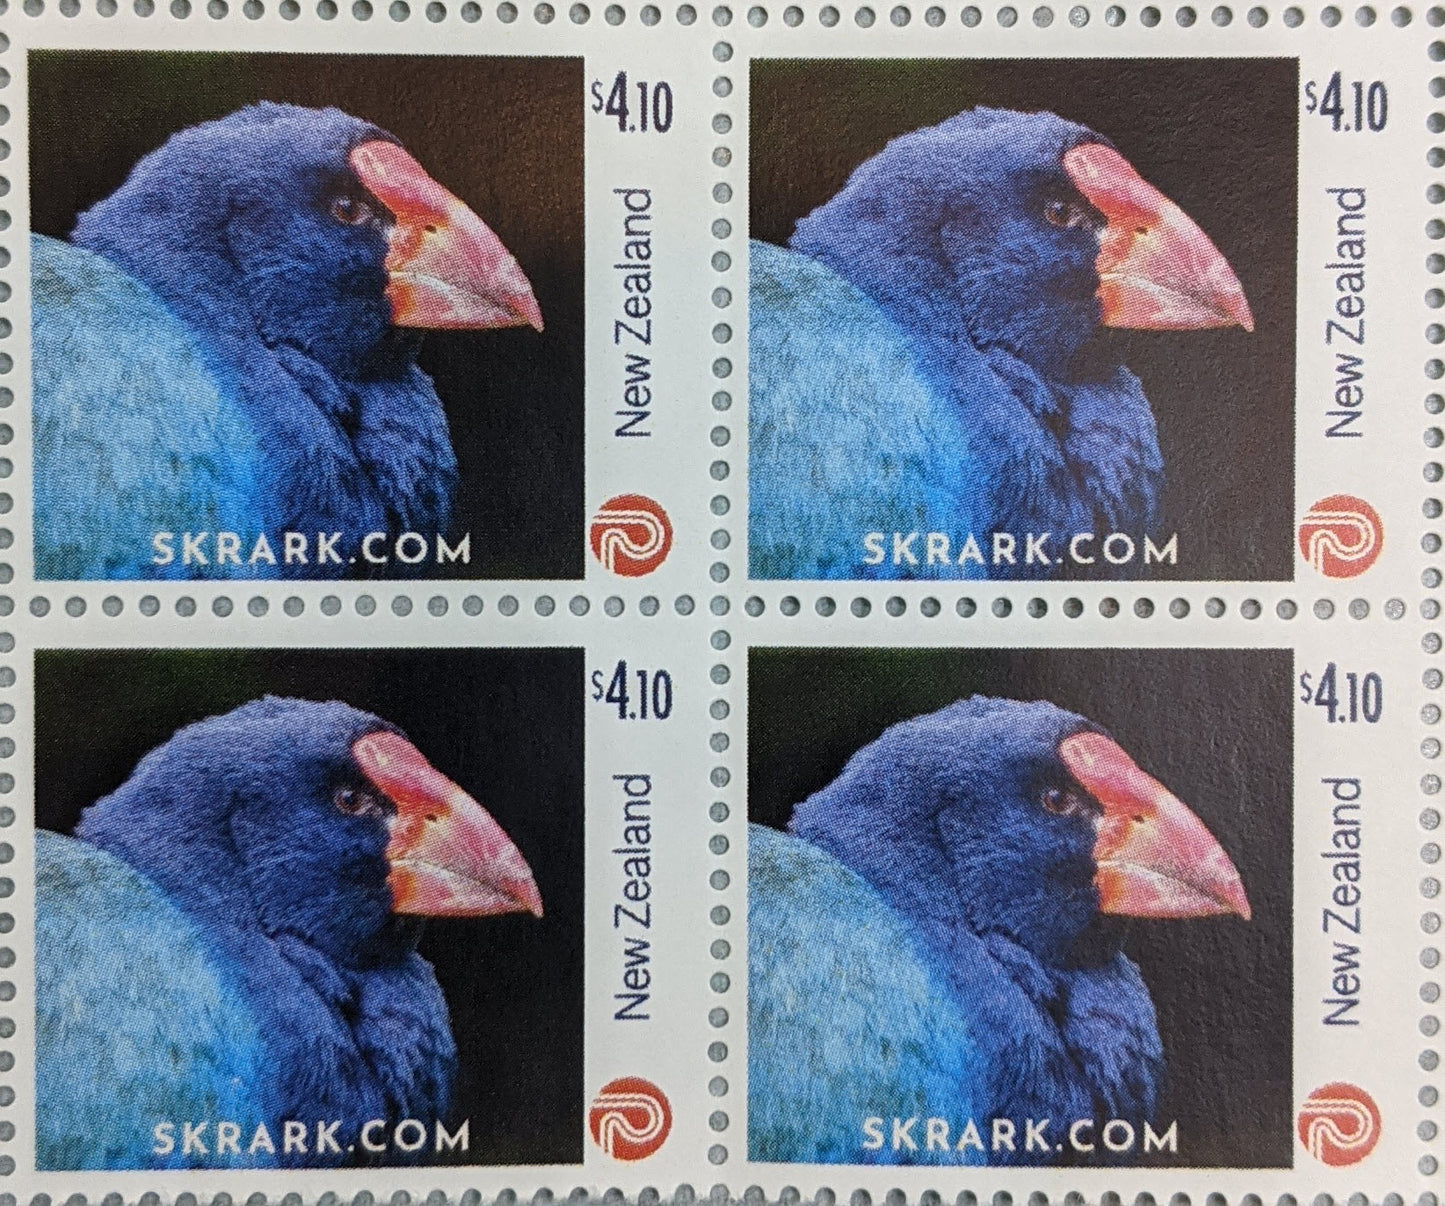 Official personalized postage stamps issued by New Zealand post of a takahe in profile - block of four